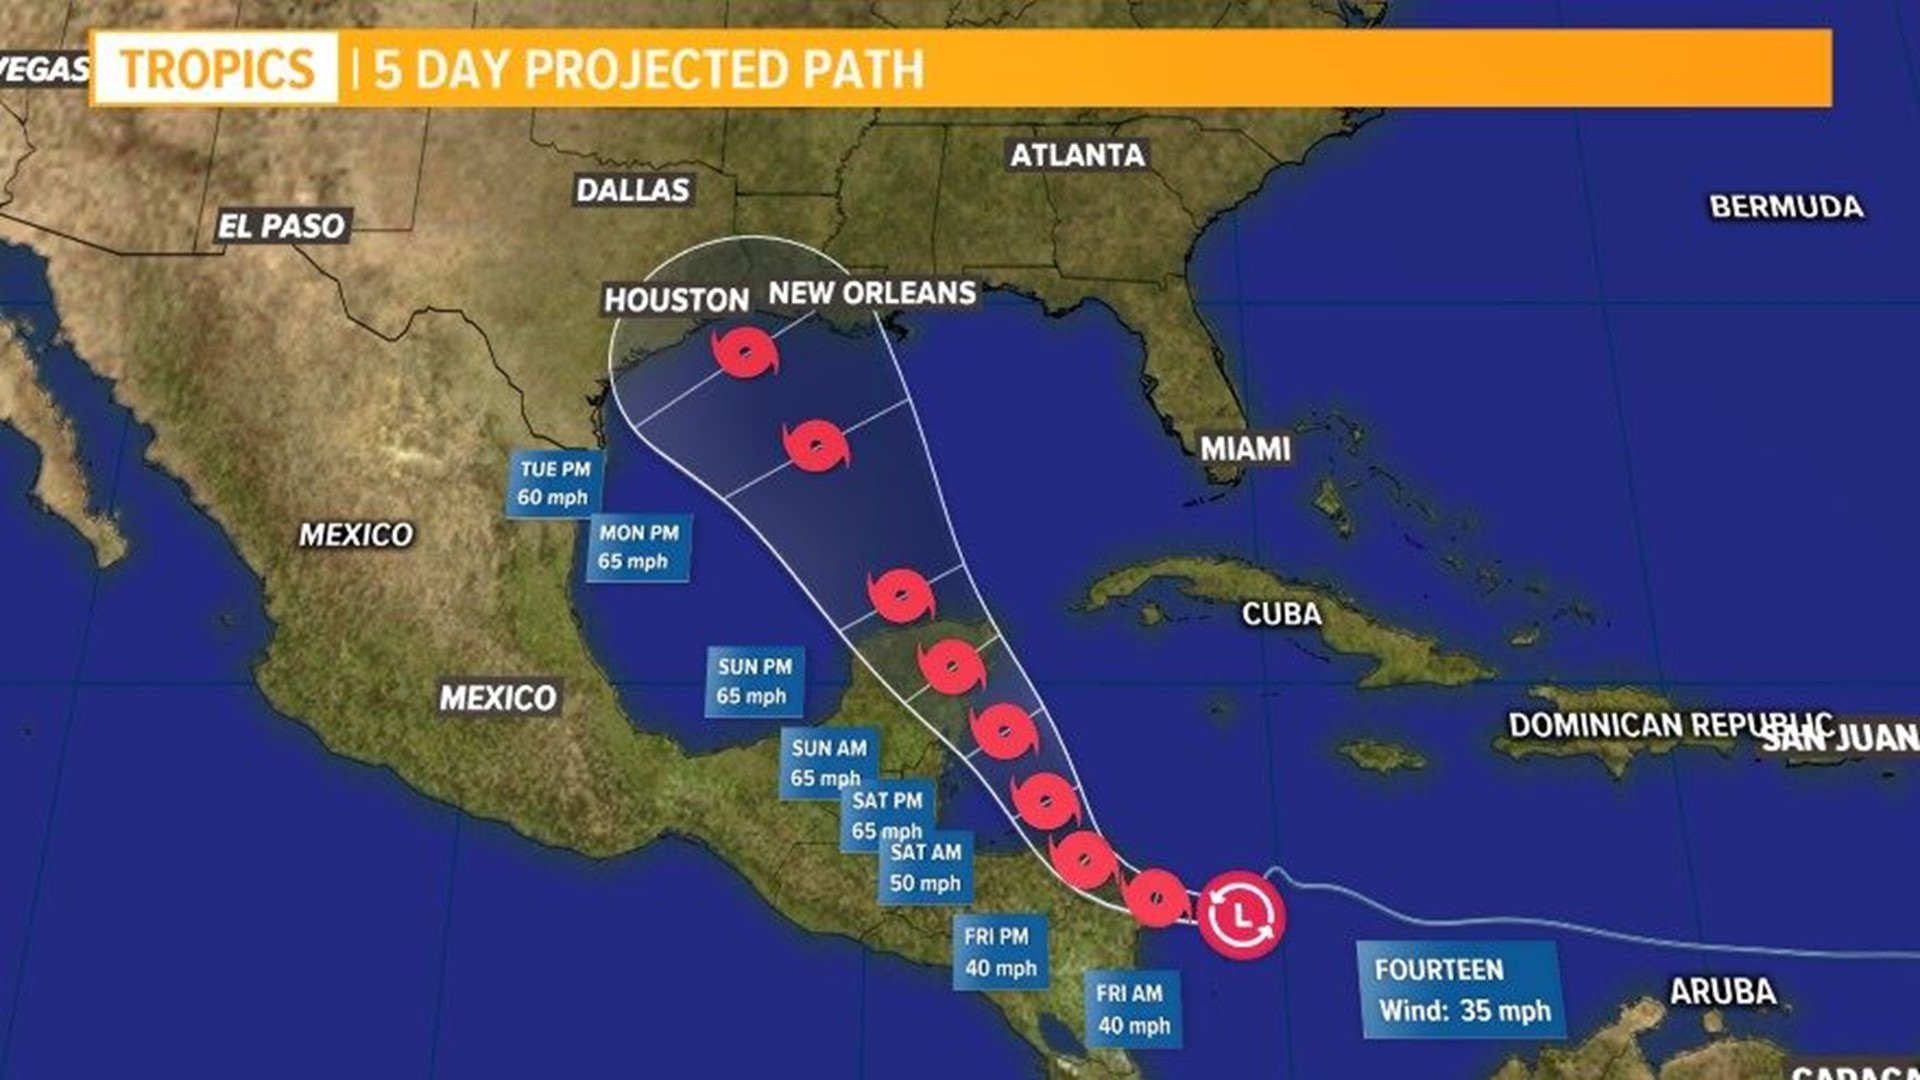 We're heading into the busiest part of hurricane season, and the tropics are active.